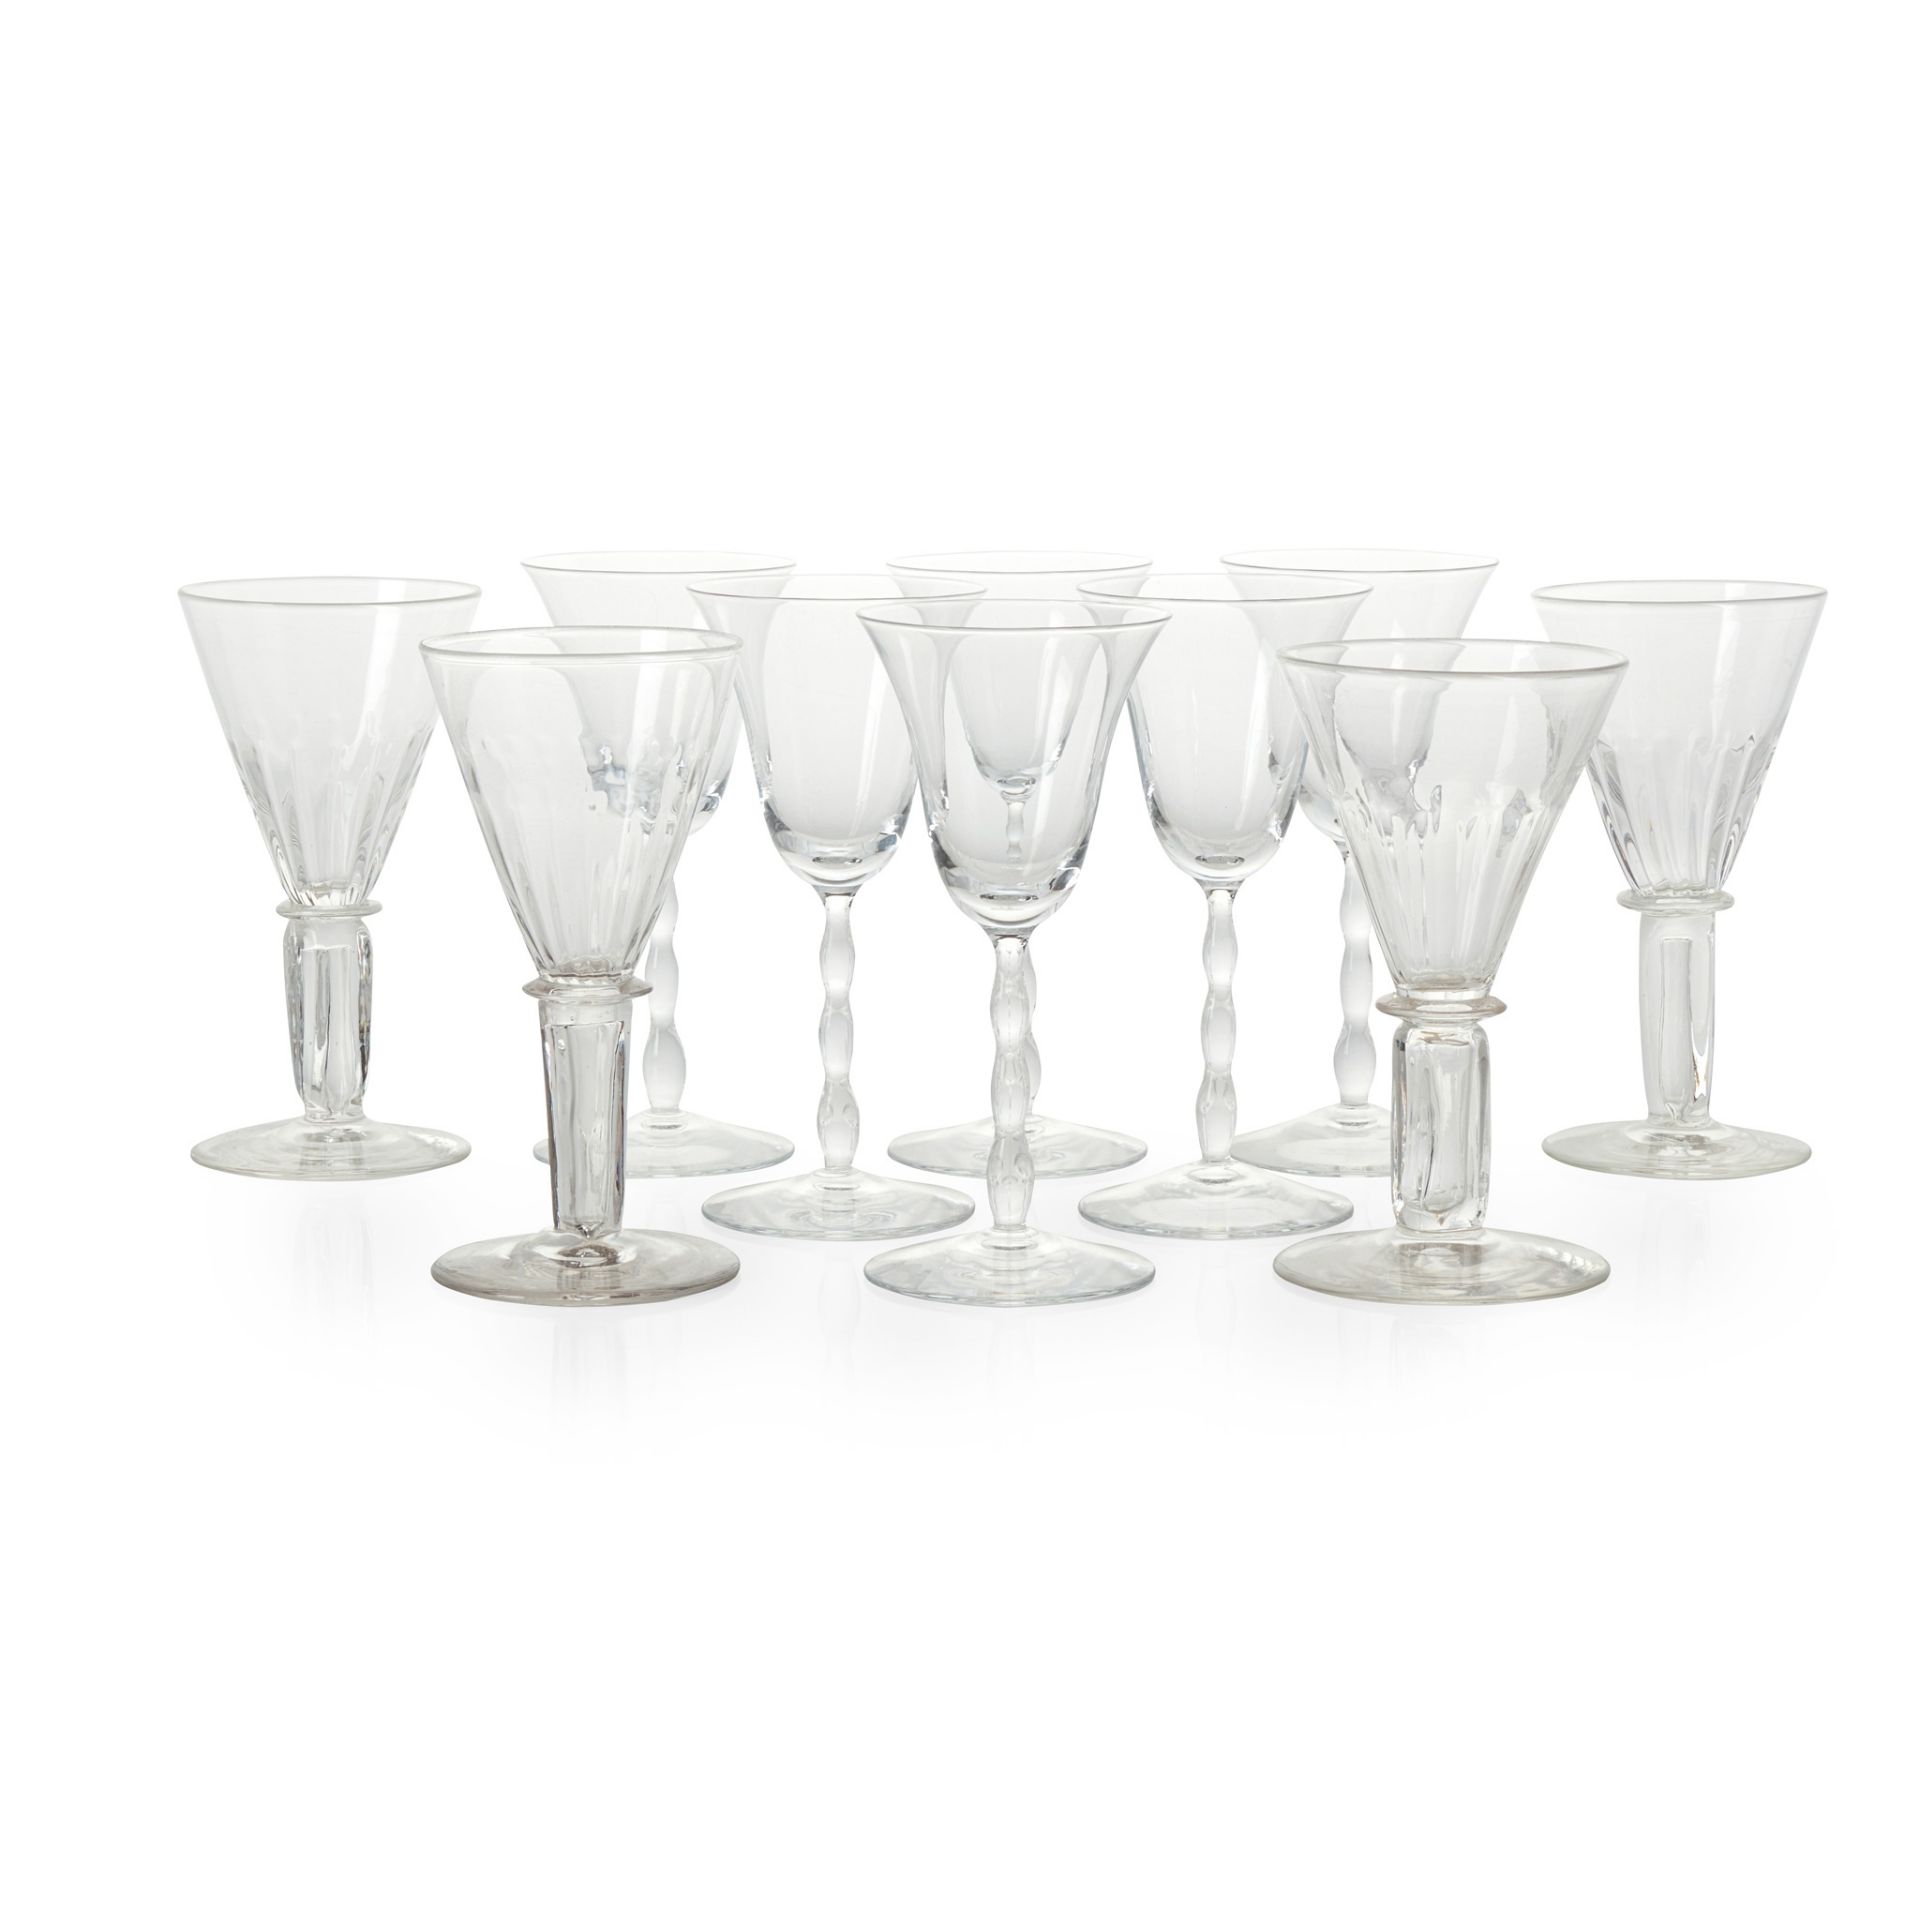 MANNER OF JAMES POWELL & SON GROUP OF ARTS & CRAFTS DRINKING GLASSES, CIRCA 1900 - Image 2 of 4